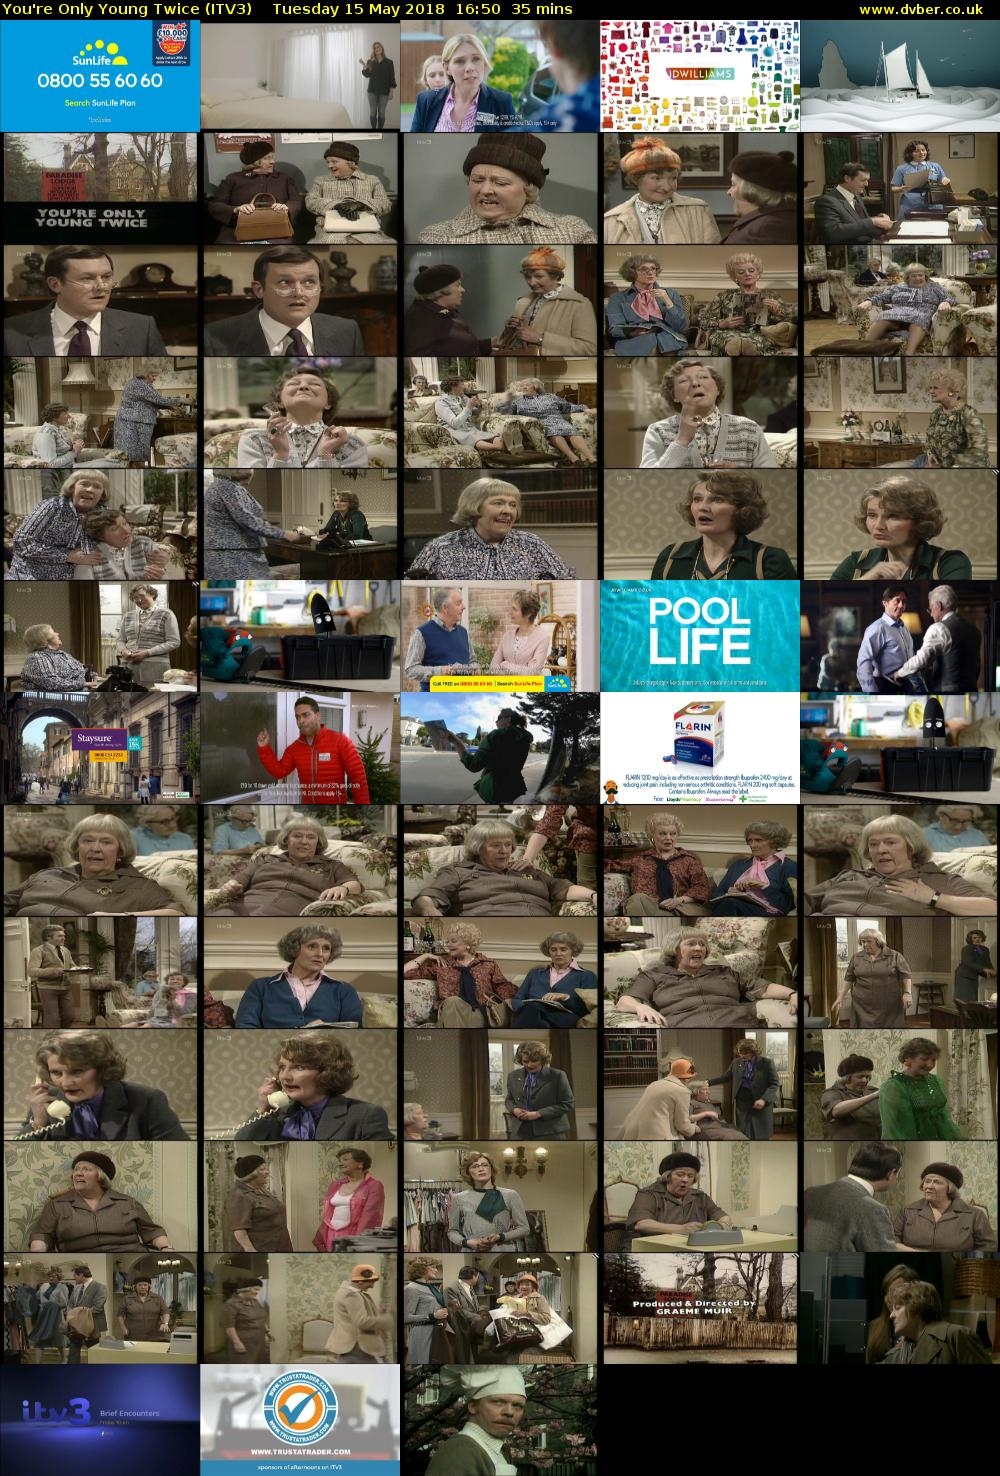 You're Only Young Twice (ITV3) Tuesday 15 May 2018 16:50 - 17:25